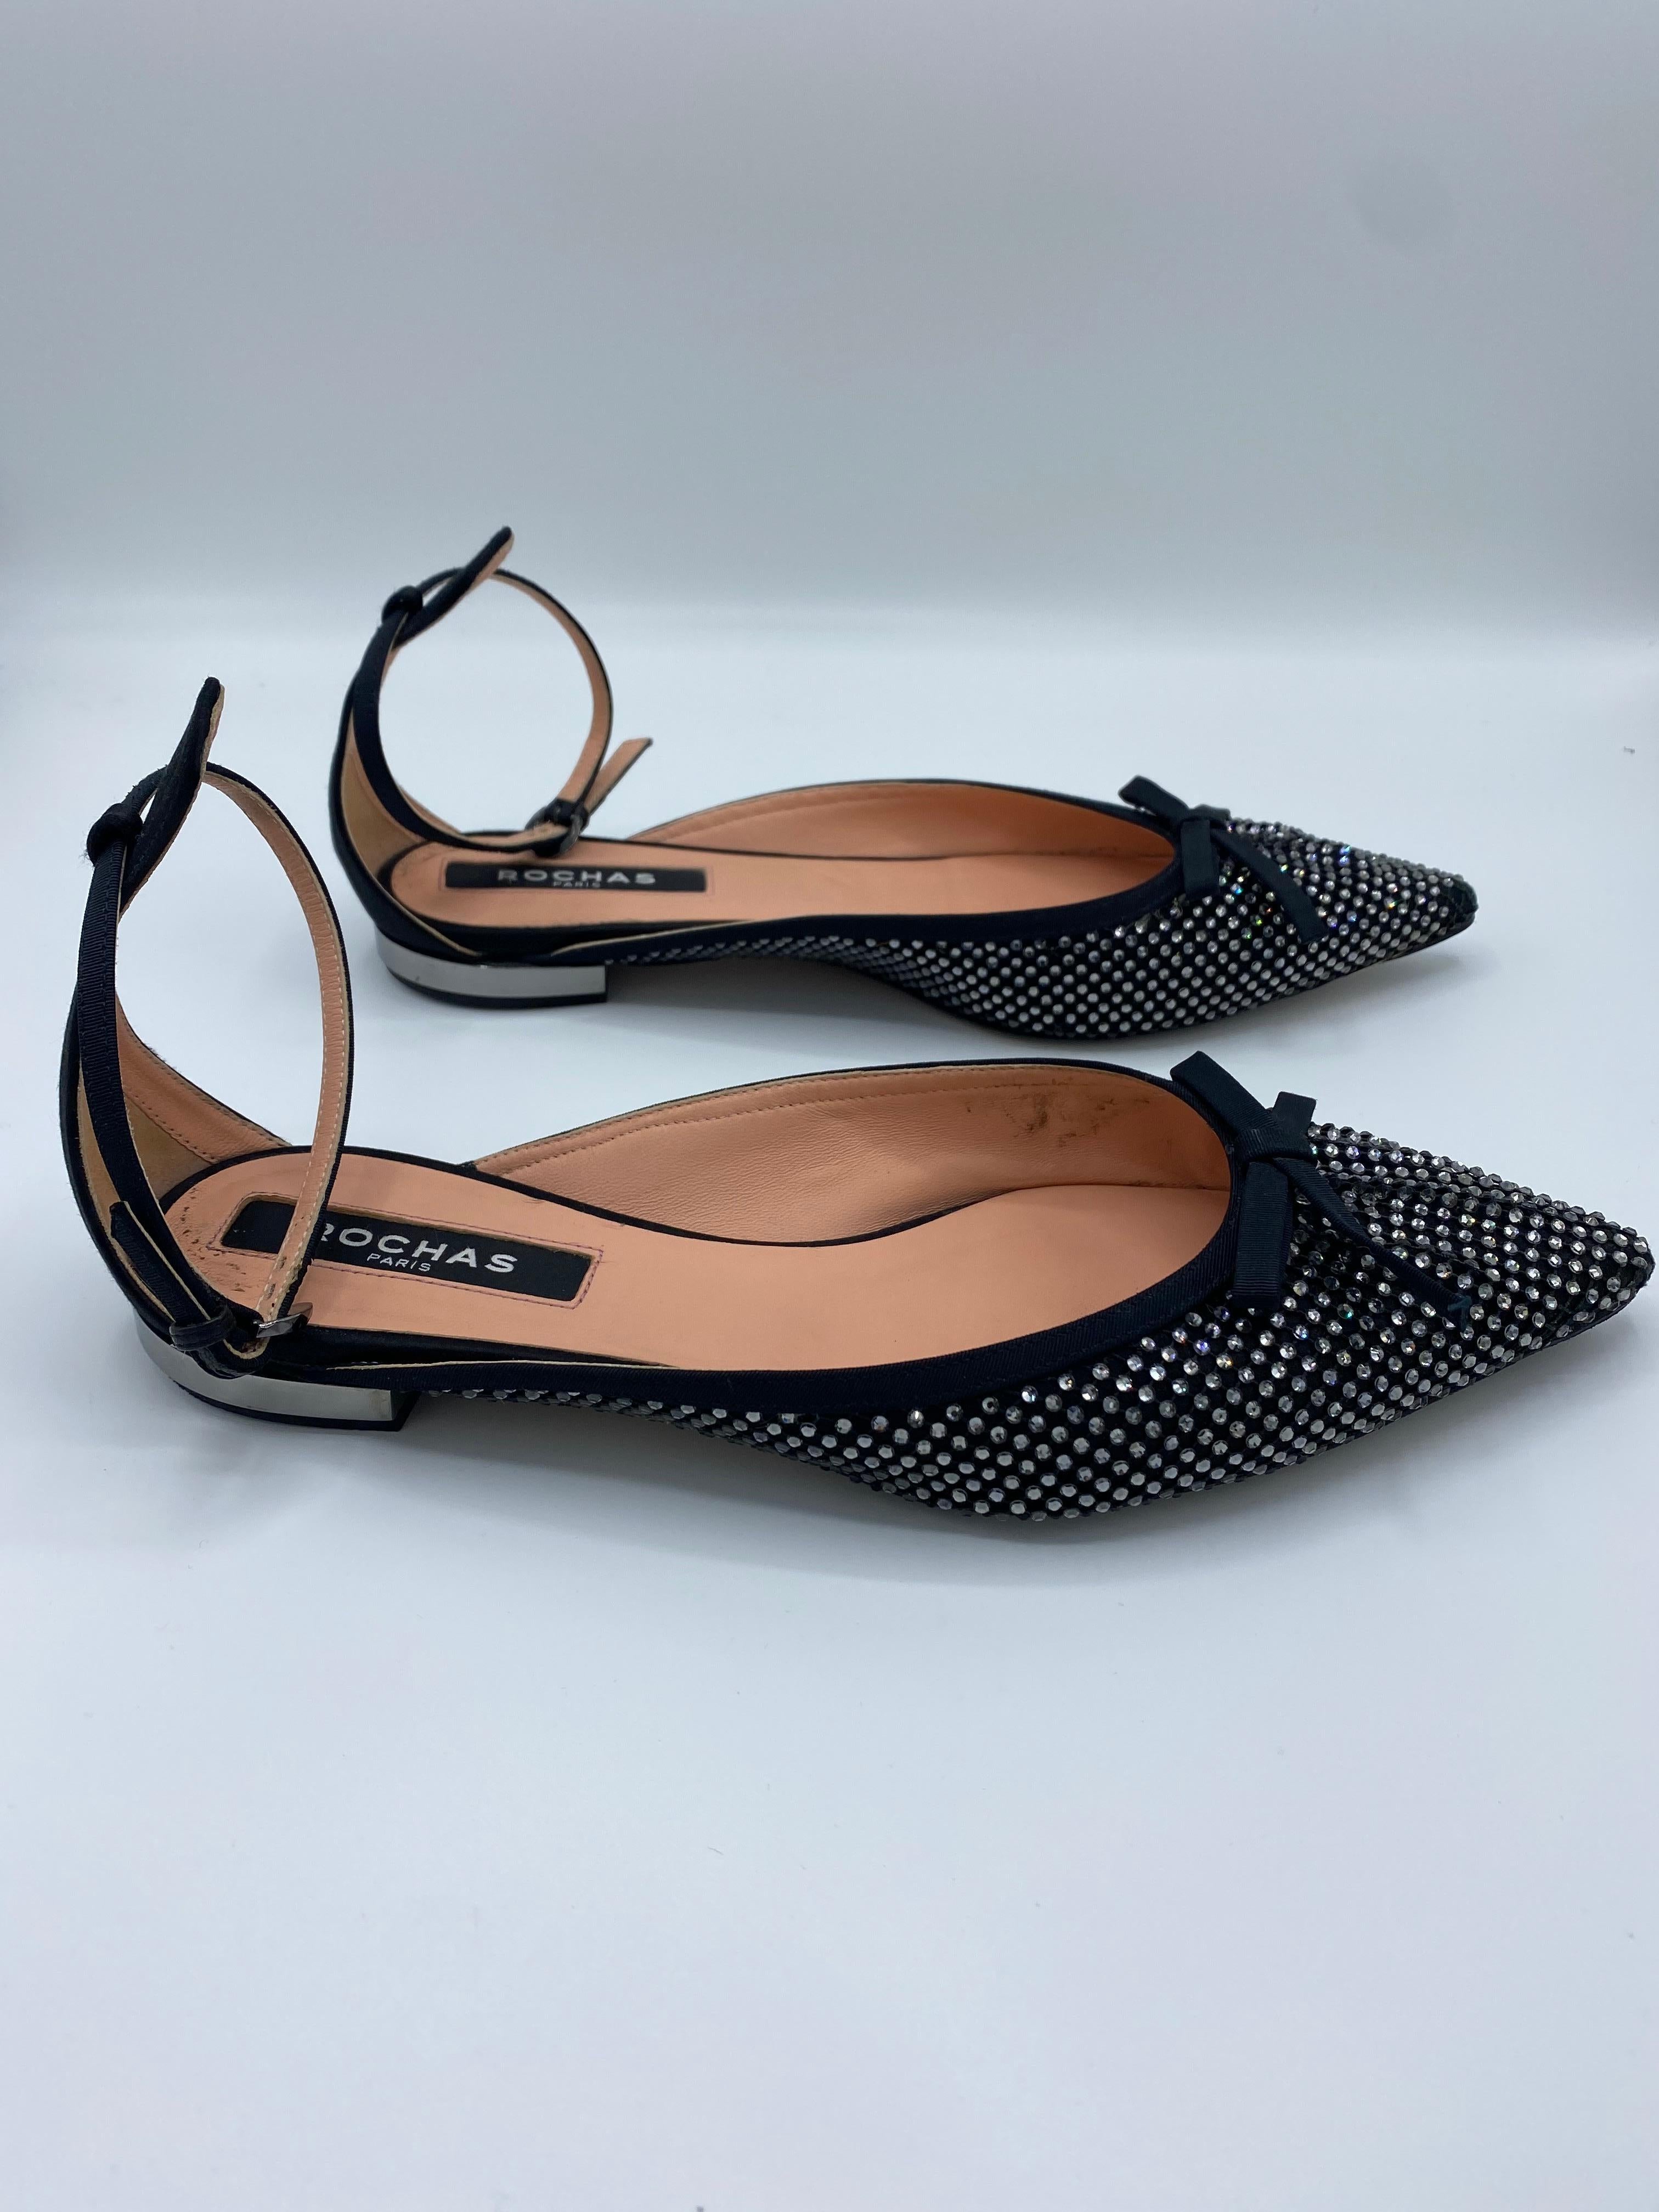 Rochas Paris Satin Grain and Black Pointed Toe Flats, Size 38.5 In Good Condition For Sale In Beverly Hills, CA